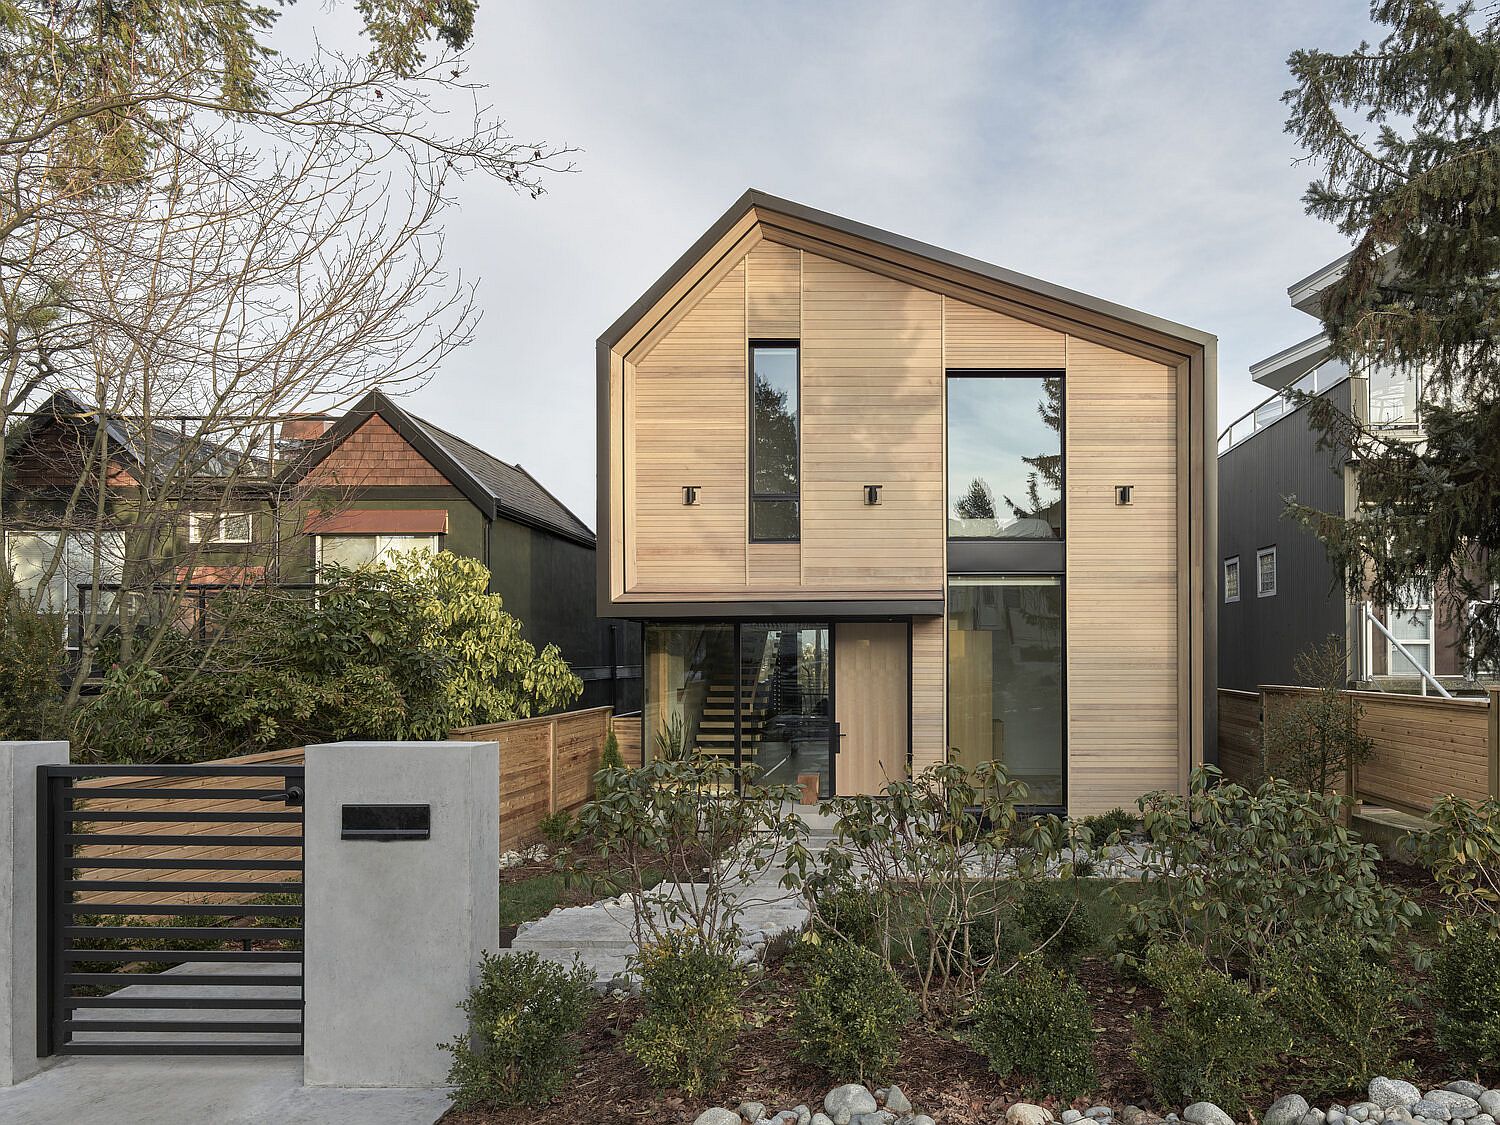 Fabulous-multi-level-family-house-in-Vancouver-with-a-warm-wooden-exterior-64031